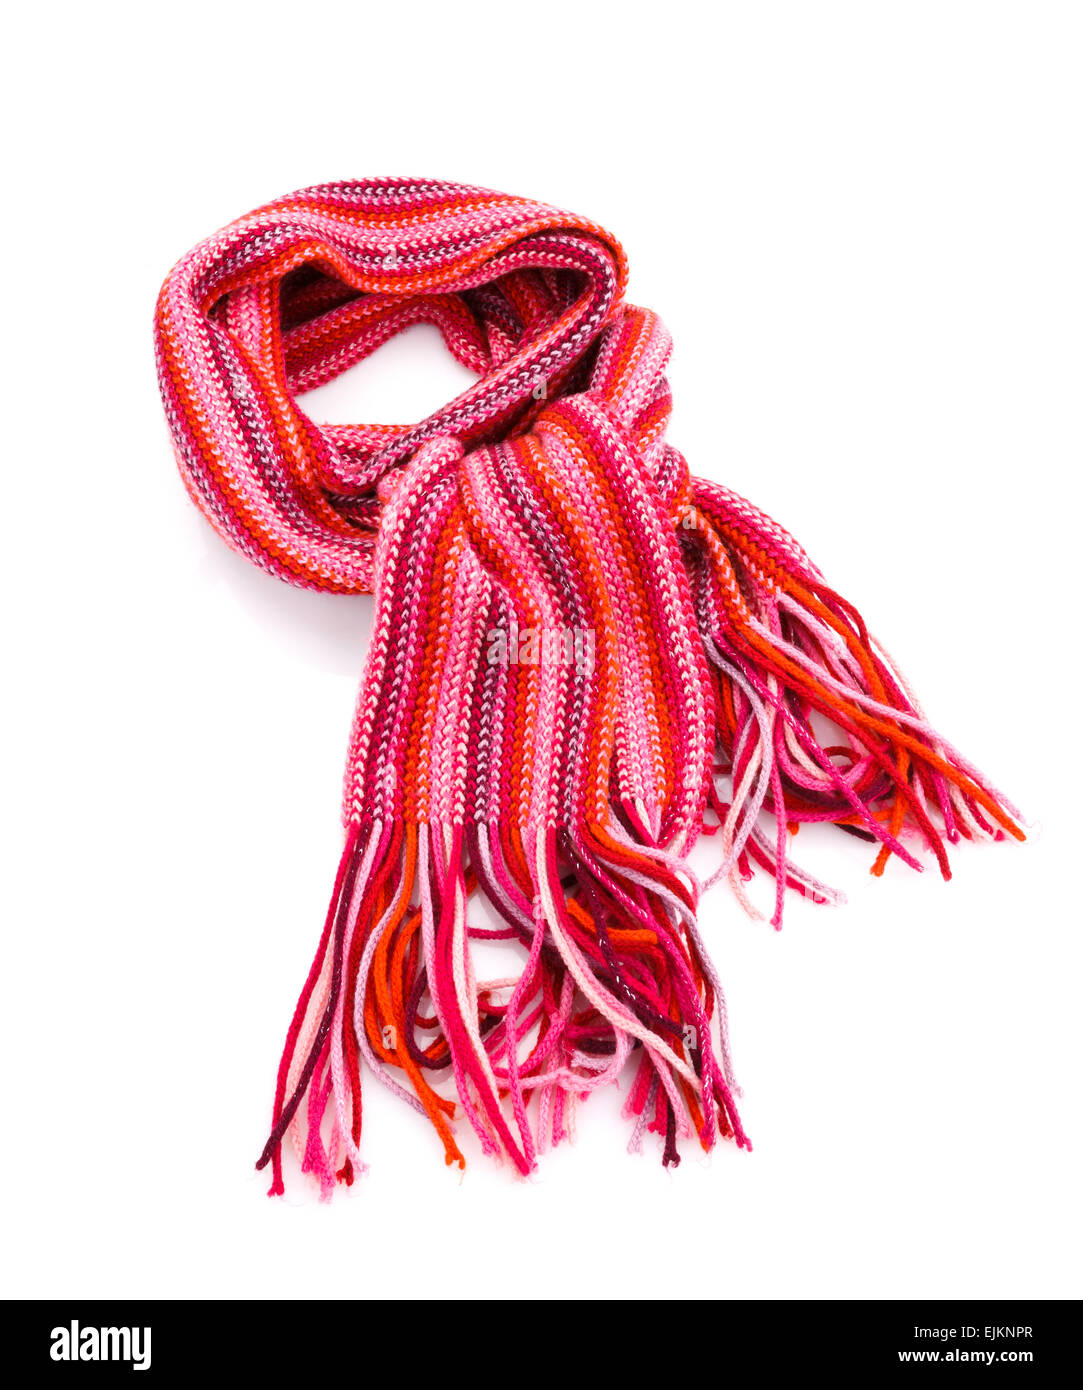 Striped red scarf Stock Photo